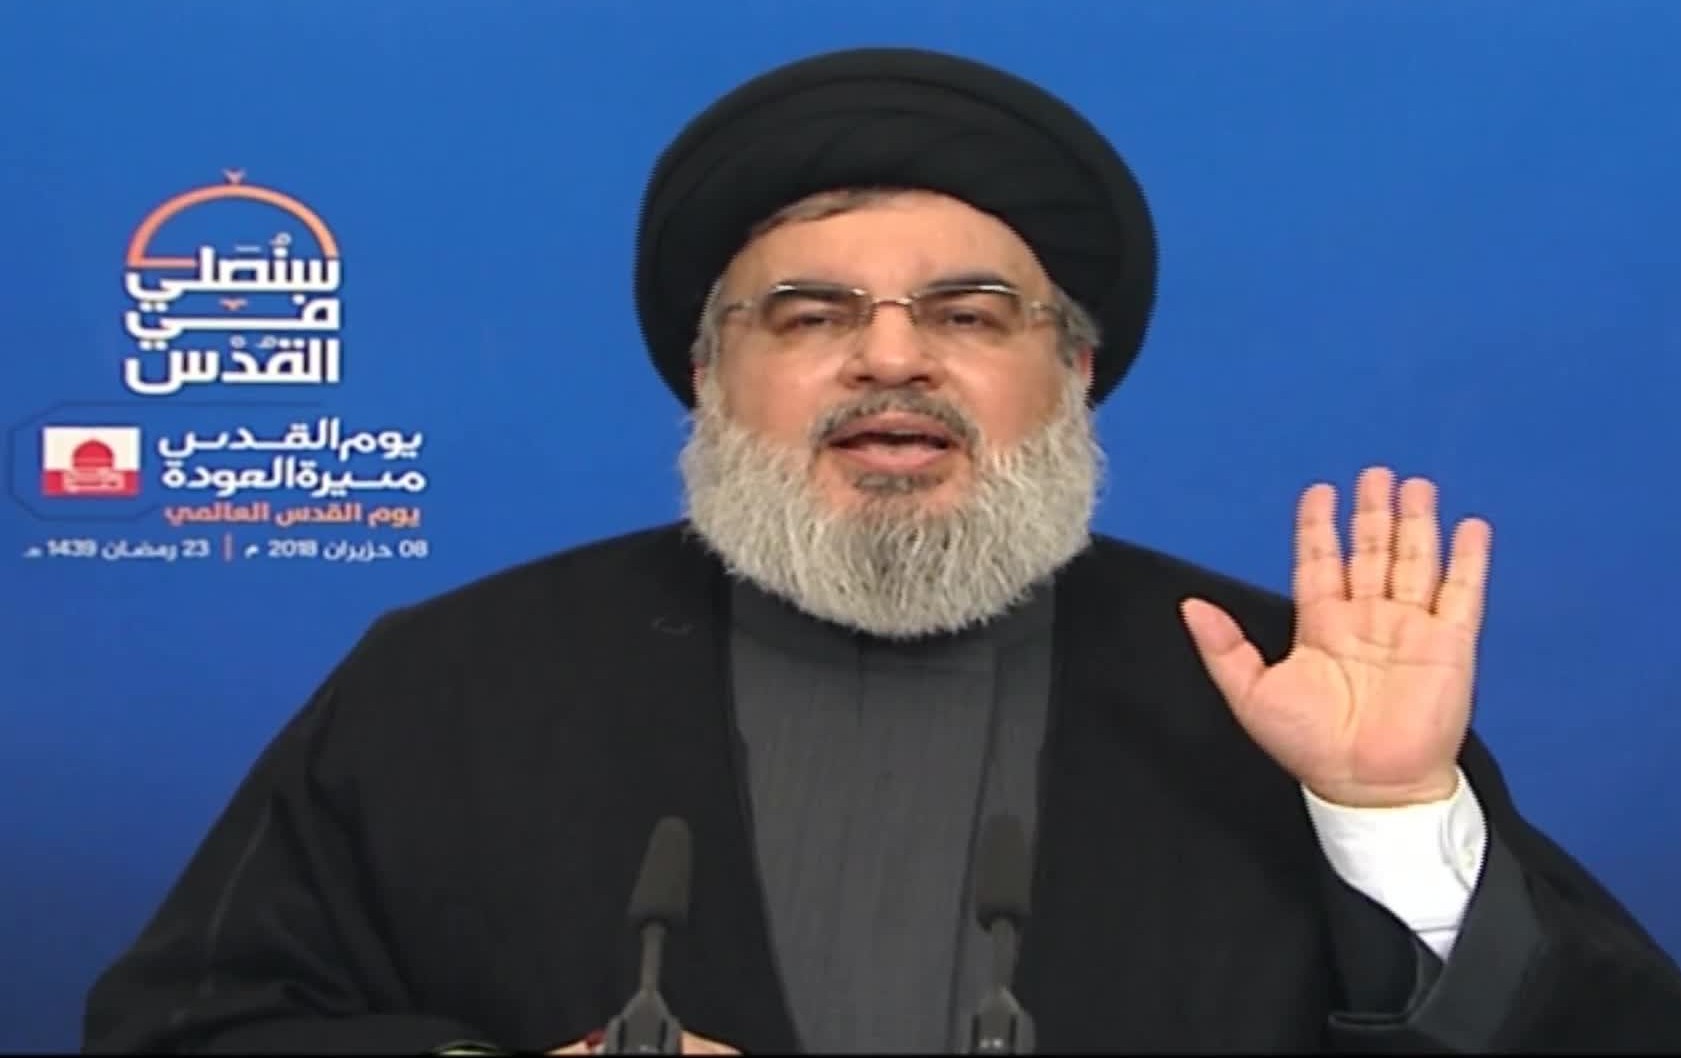 Hezbollah Leader: We Will Remain In Syria Even If World Unites Against Us